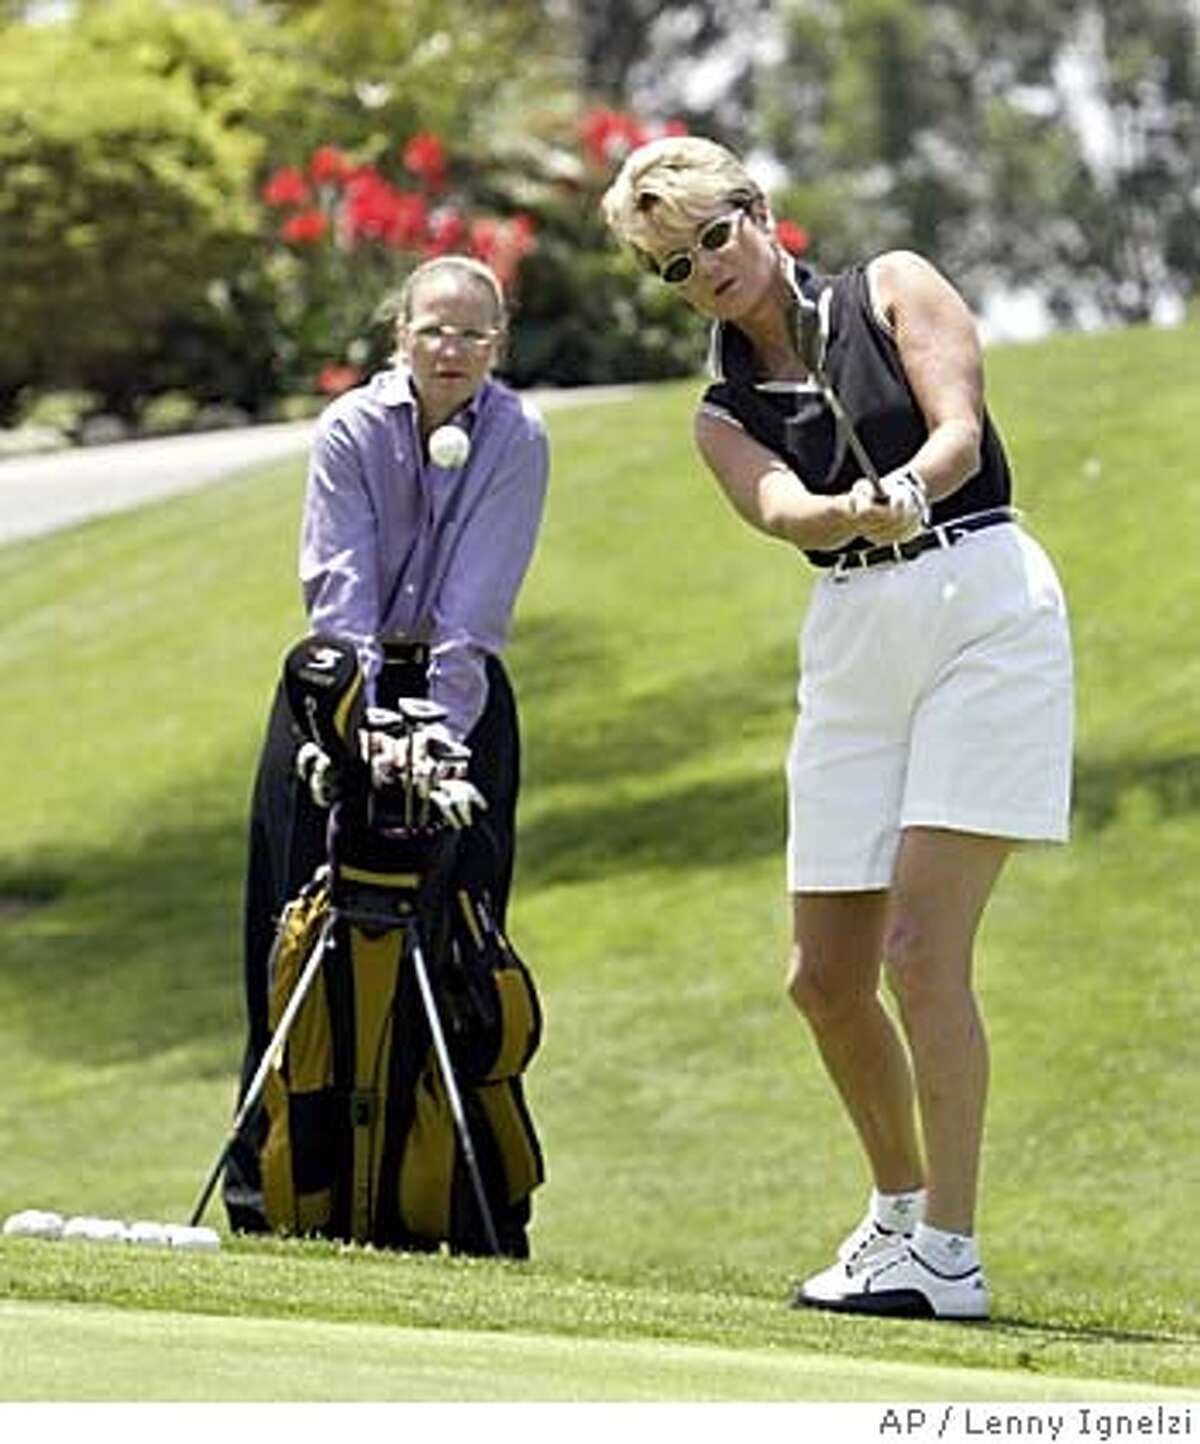 ** FILE ** Brigit Koebke pitches to a practice green at Bernardo Heights Country Club in San Diego, as her domestic partner, Kendall French, watches May 20, 2004. Deciding a case brought against the Country Club, the state's highest court said Monday that allowing the families of married members to golf gratis while charging the partners of gay members constitutes "impermissible marital status discrimination." The case was brought by Koebke, 48, an avid golfer who pays about $500 a month in membership fees. Koebke challenged a club policy allowing children, grandchildren and spouses of married members to play free, while her longtime partner, French, 43, could only play as a guest six times a year for up to $70 in greens fees. (AP Photo/Lenny Ignelzi)